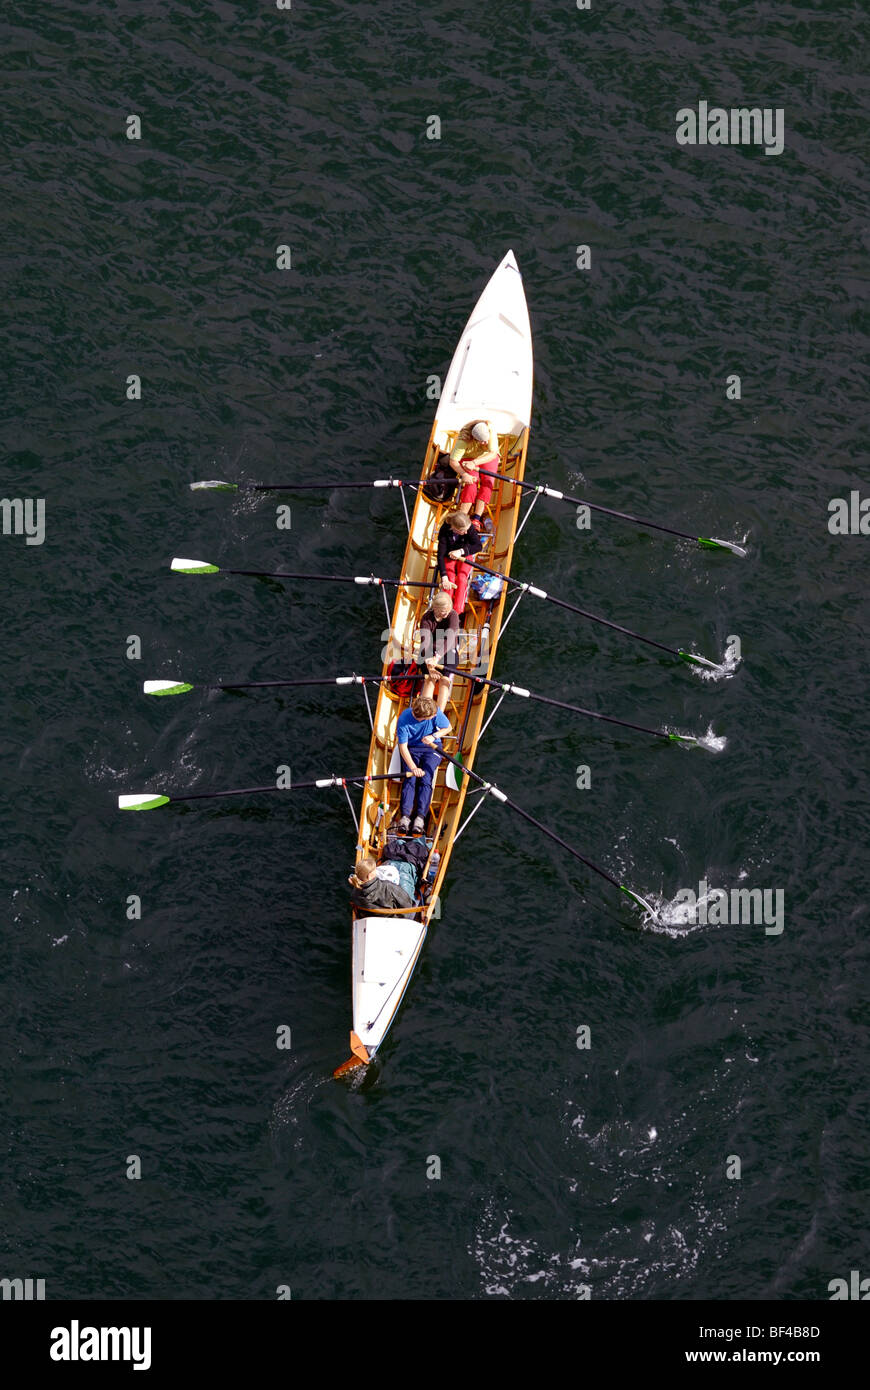 Water sports, quadruple sculls with steersman, young rowers in action Stock Photo